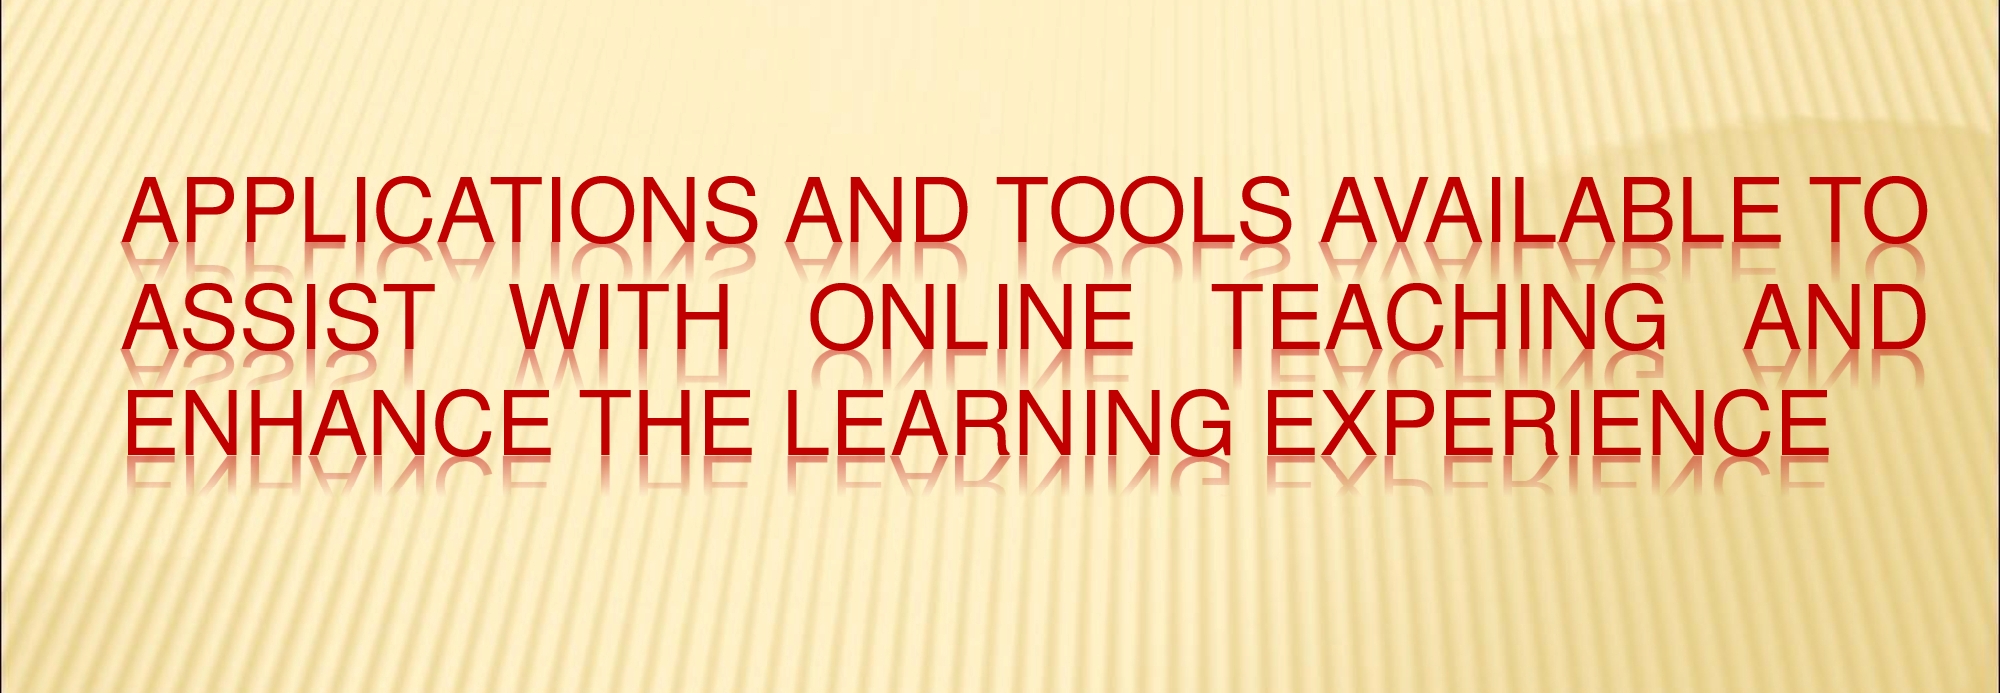 Applications and tools available to assist with online teaching and enhance the learning experience